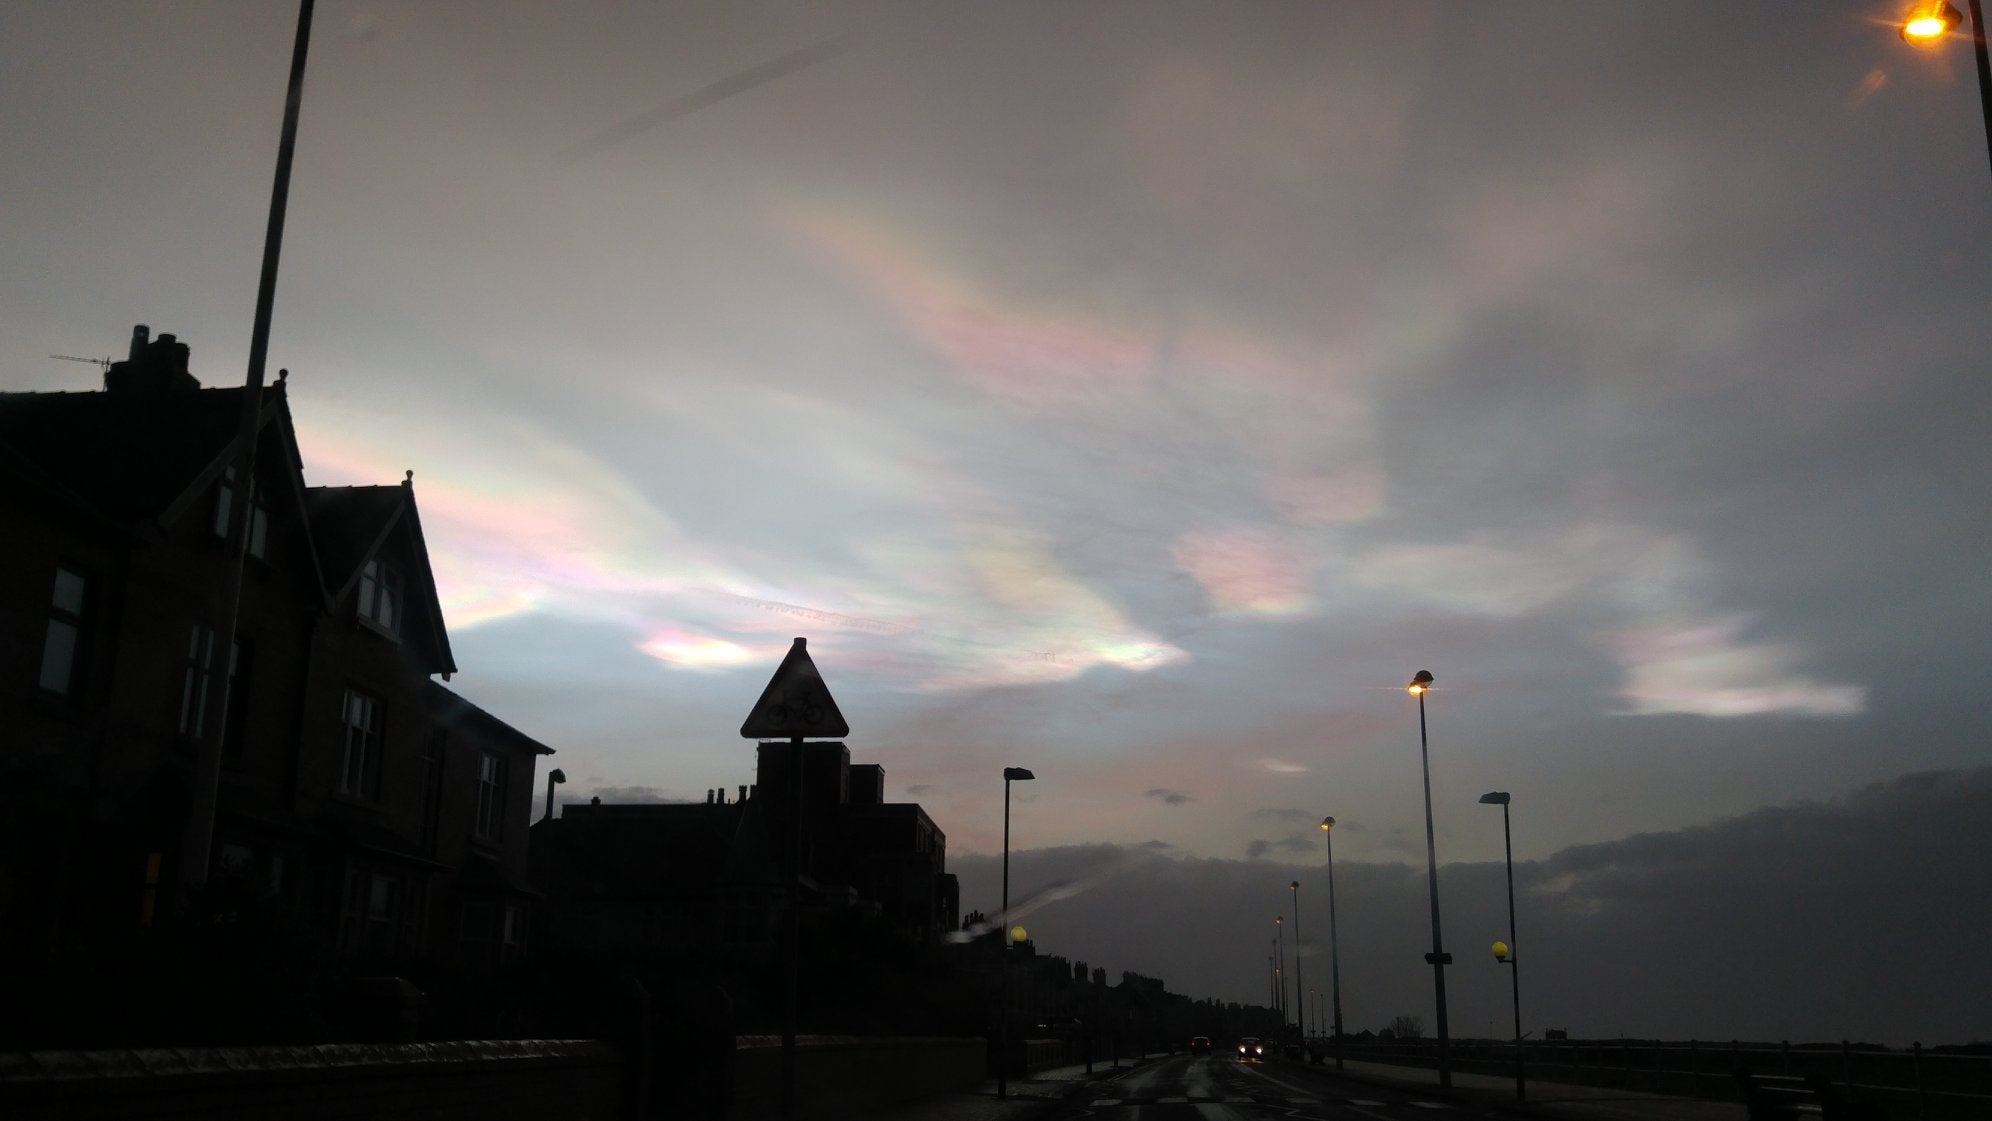 Photographer Dawn Douglas snapped a picture of the unusual clouds over Fleetwood in Lancashire (Pic: Dawn Douglas)